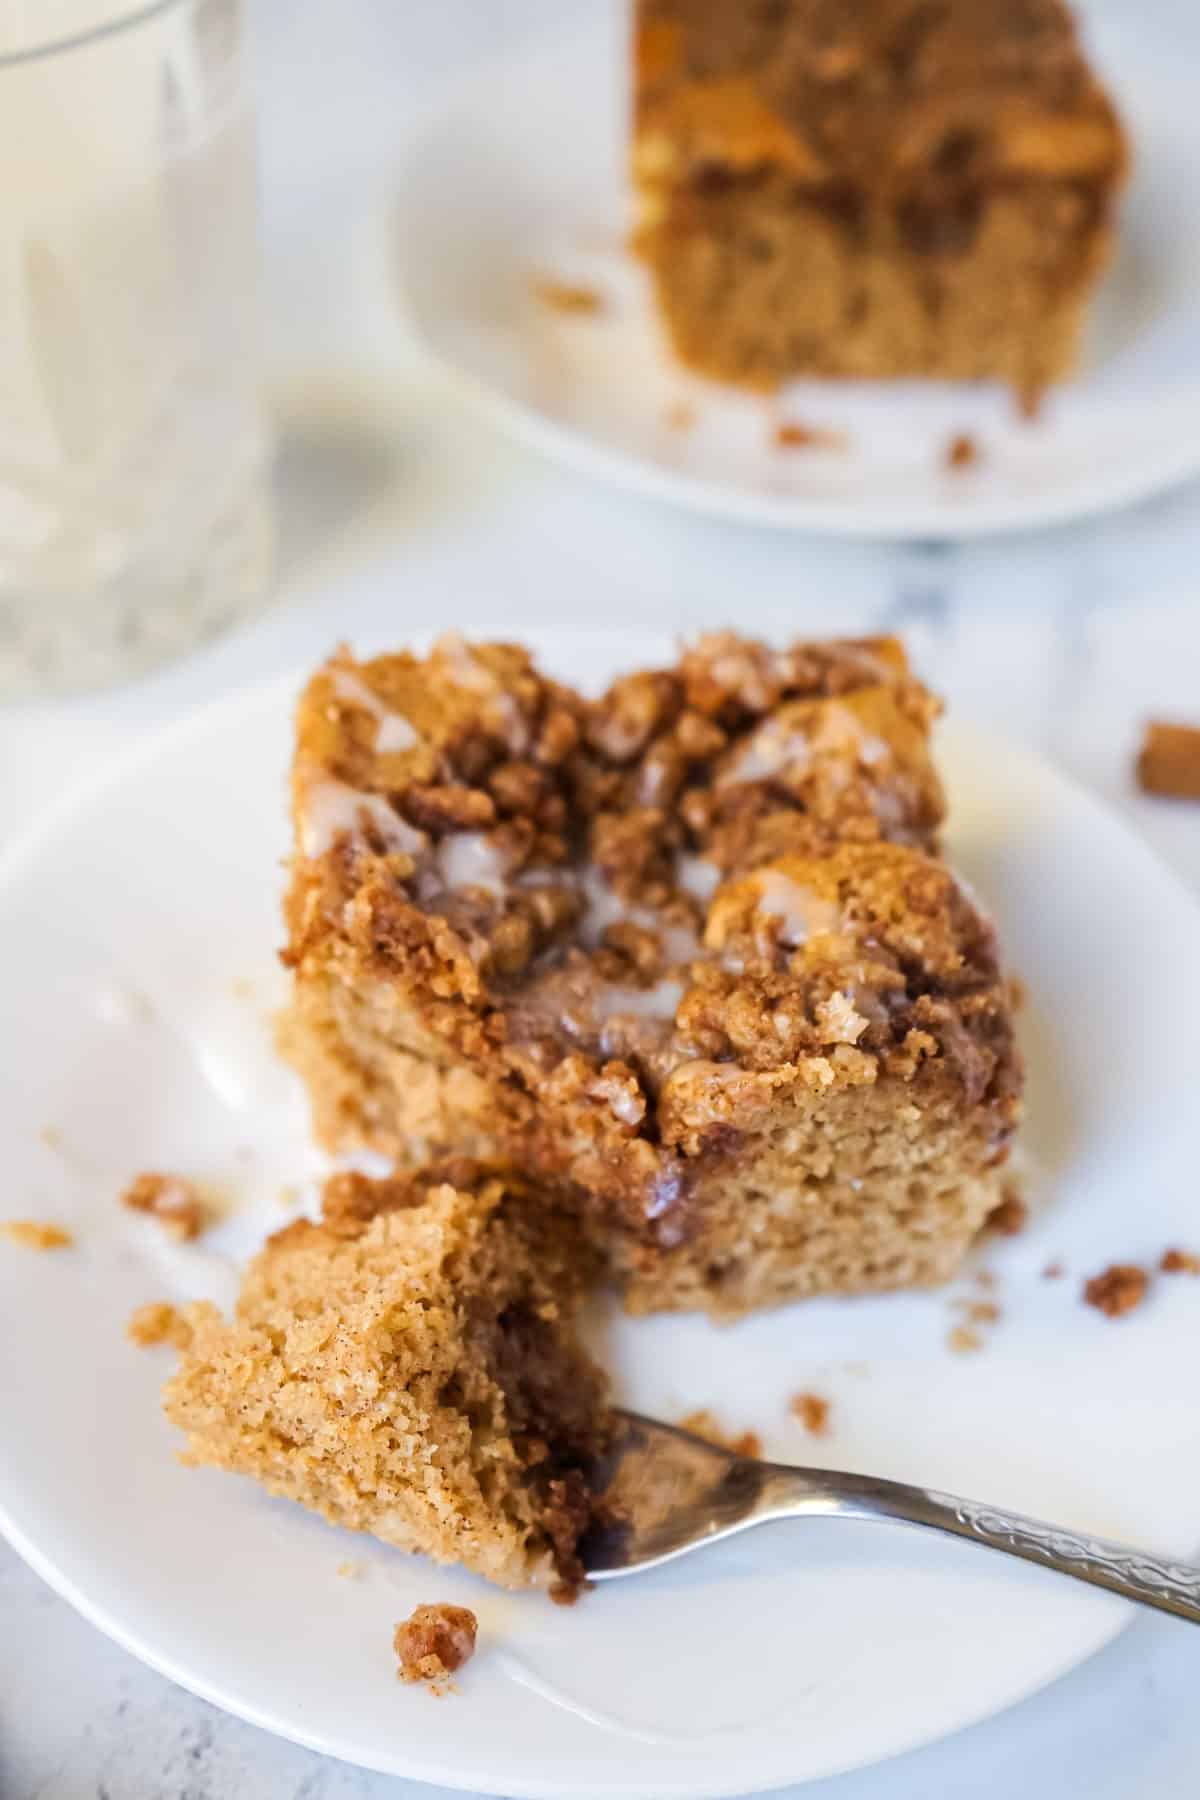 A piece of the coffee cake made with Bisquick on a white plate with a fork.